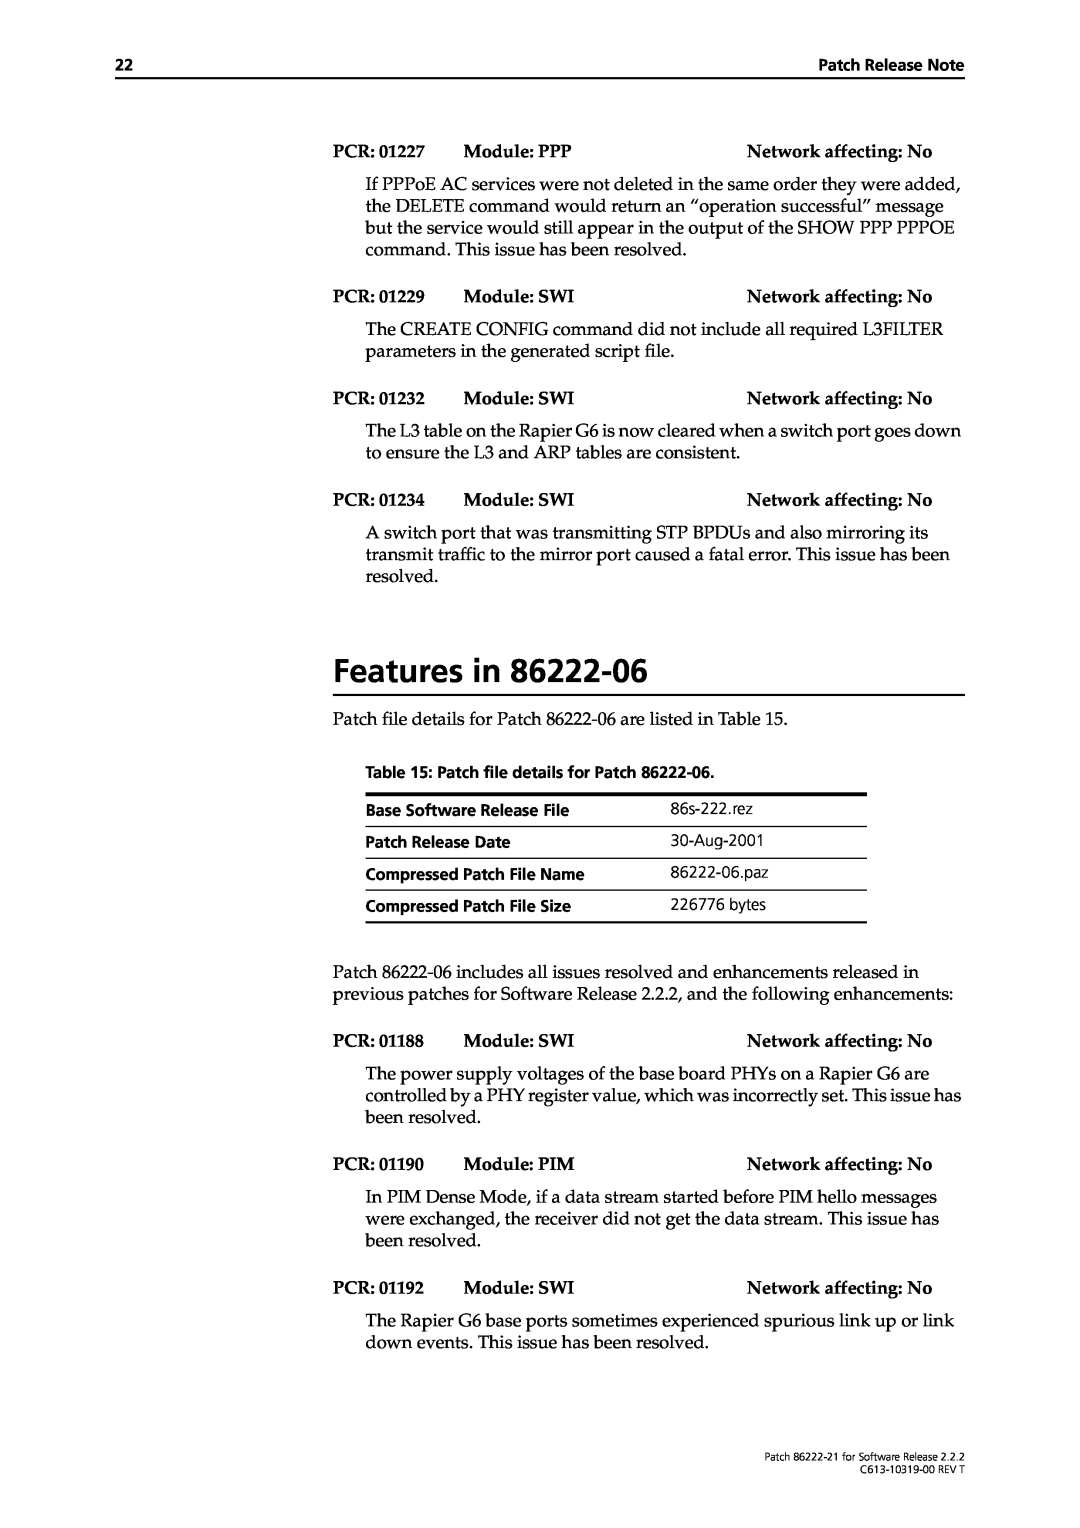 Allied Telesis 86222-21 manual Features in, Patch file details for Patch 86222-06 are listed in Table 